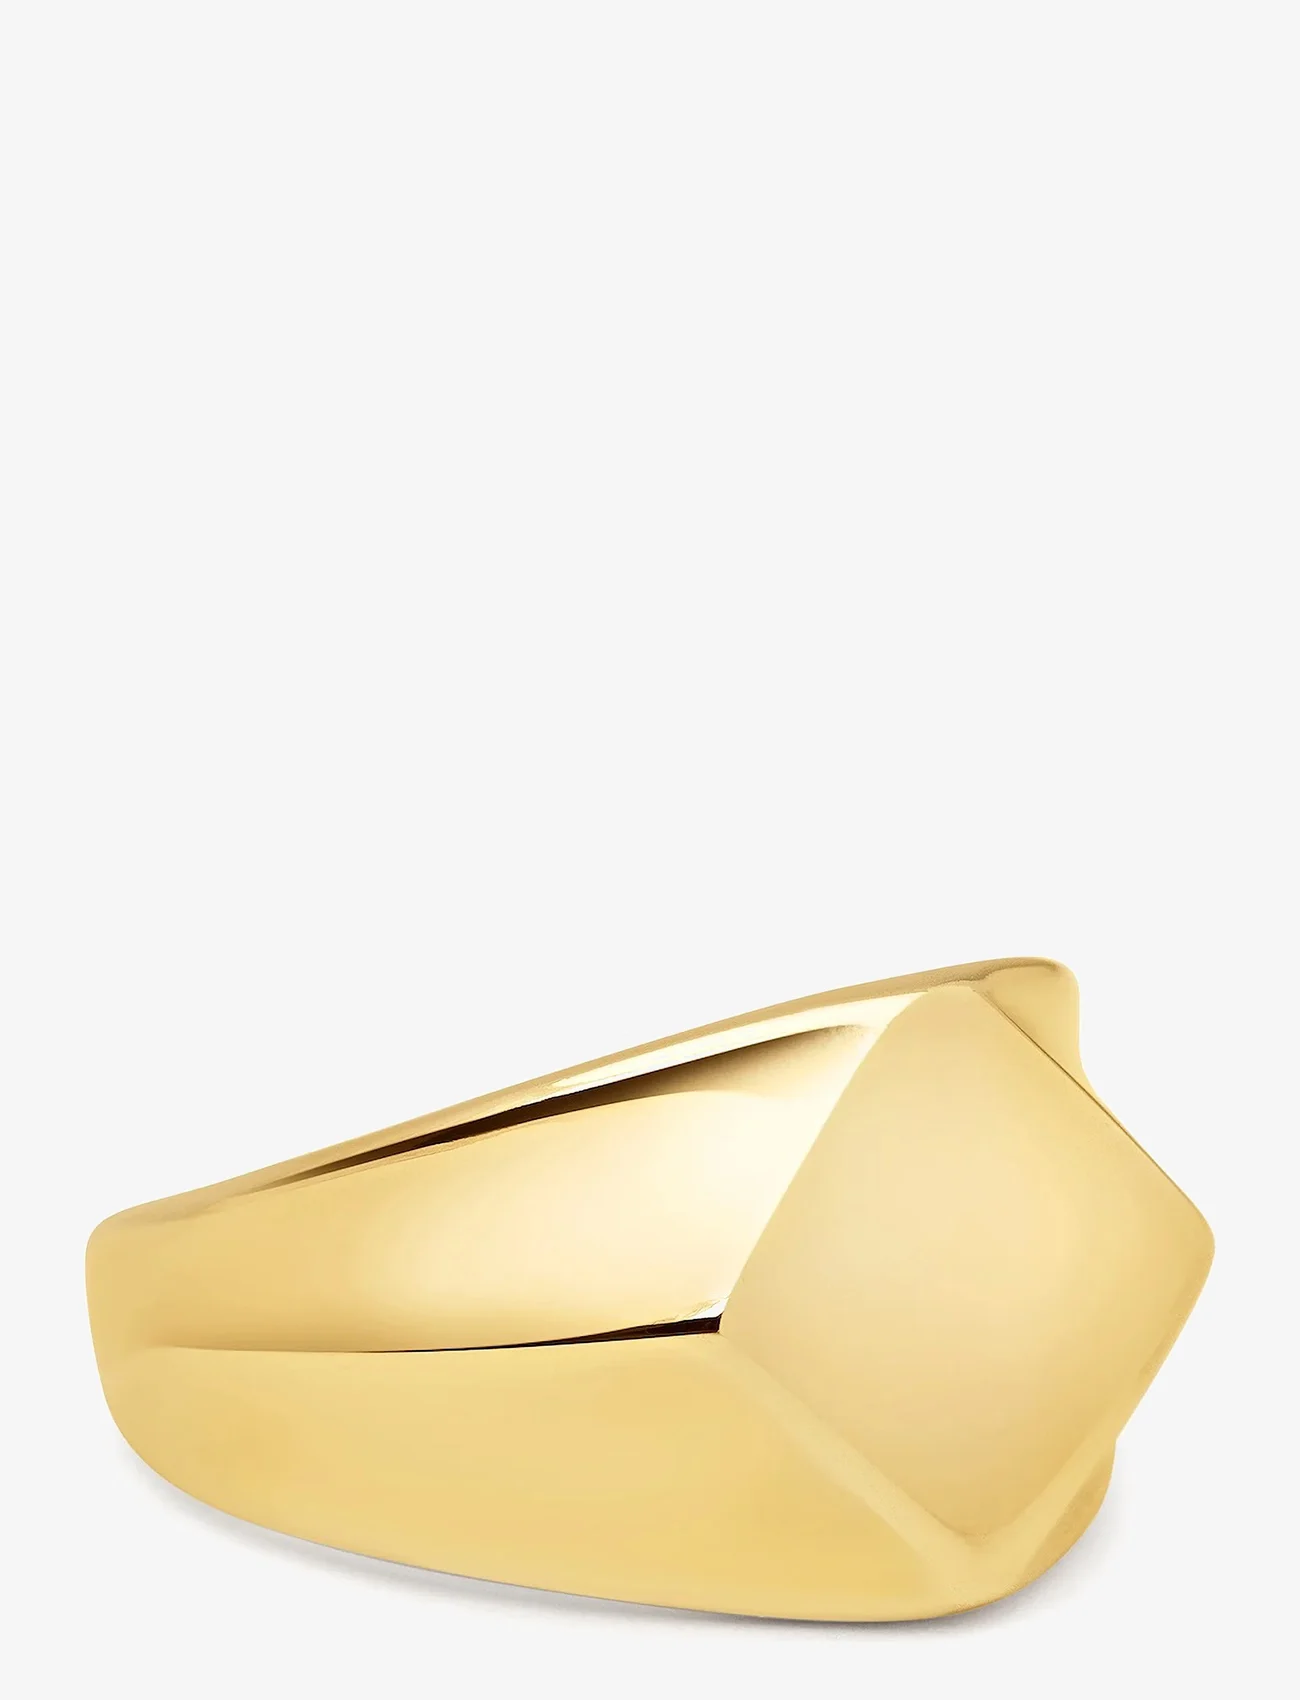 Nialaya - Men's Squared Stainless Steel Ring with Gold Plating - syntymäpäivälahjat - gold - 0